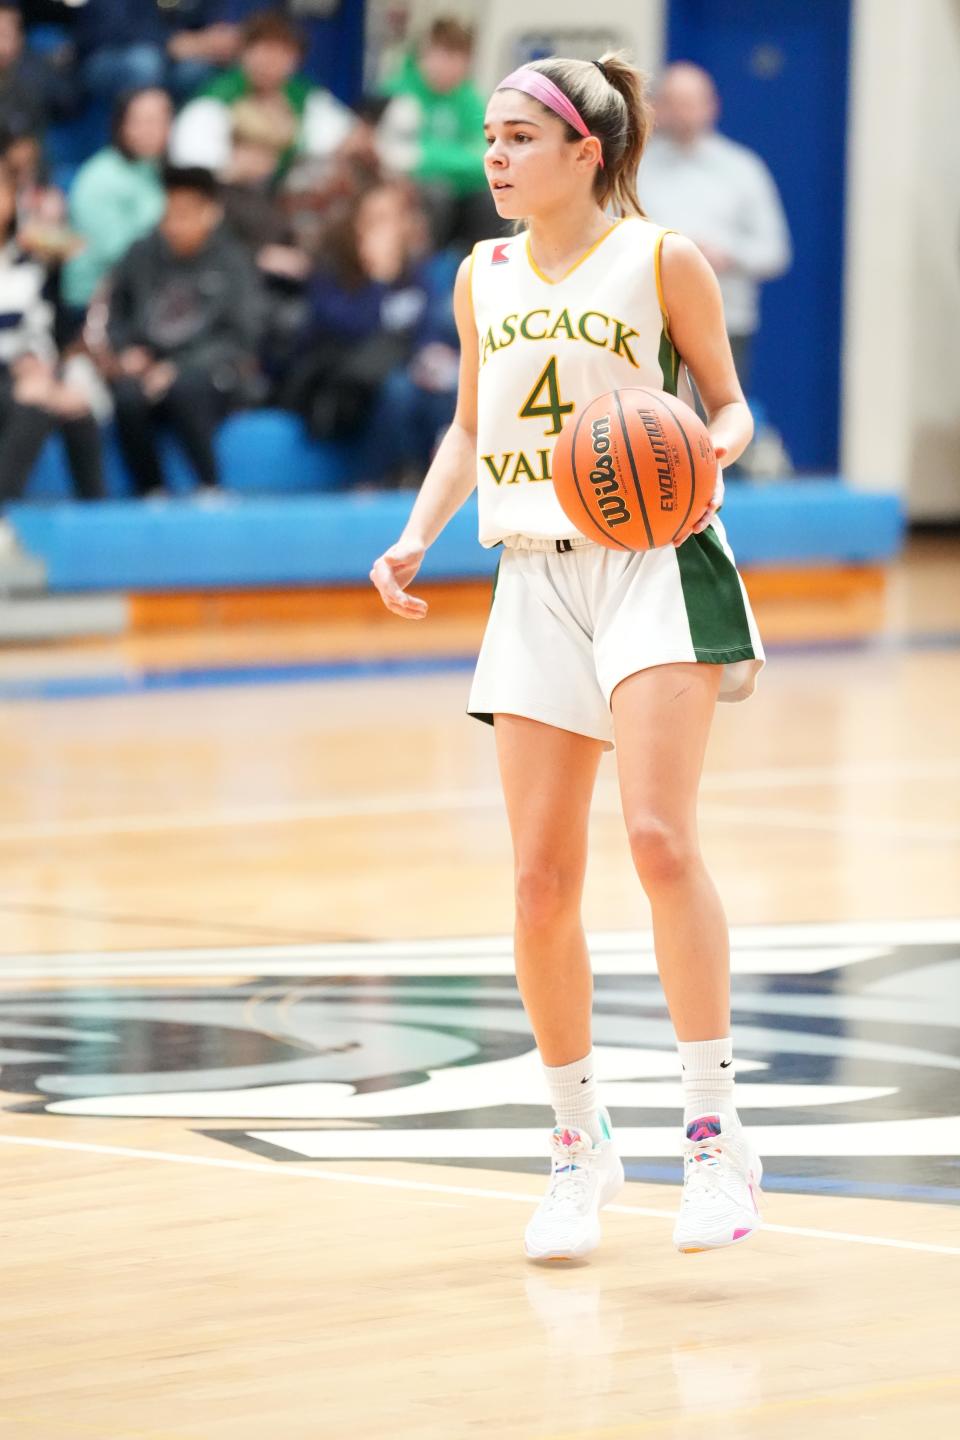 Pascack Valley vs. Mahwah in the Girls Basketball Bergen County Tournament quarterfinals at Northern Valley Regional High School at Demarest on Saturday, February 4, 2023. PV #4 Celina Bussanich. 